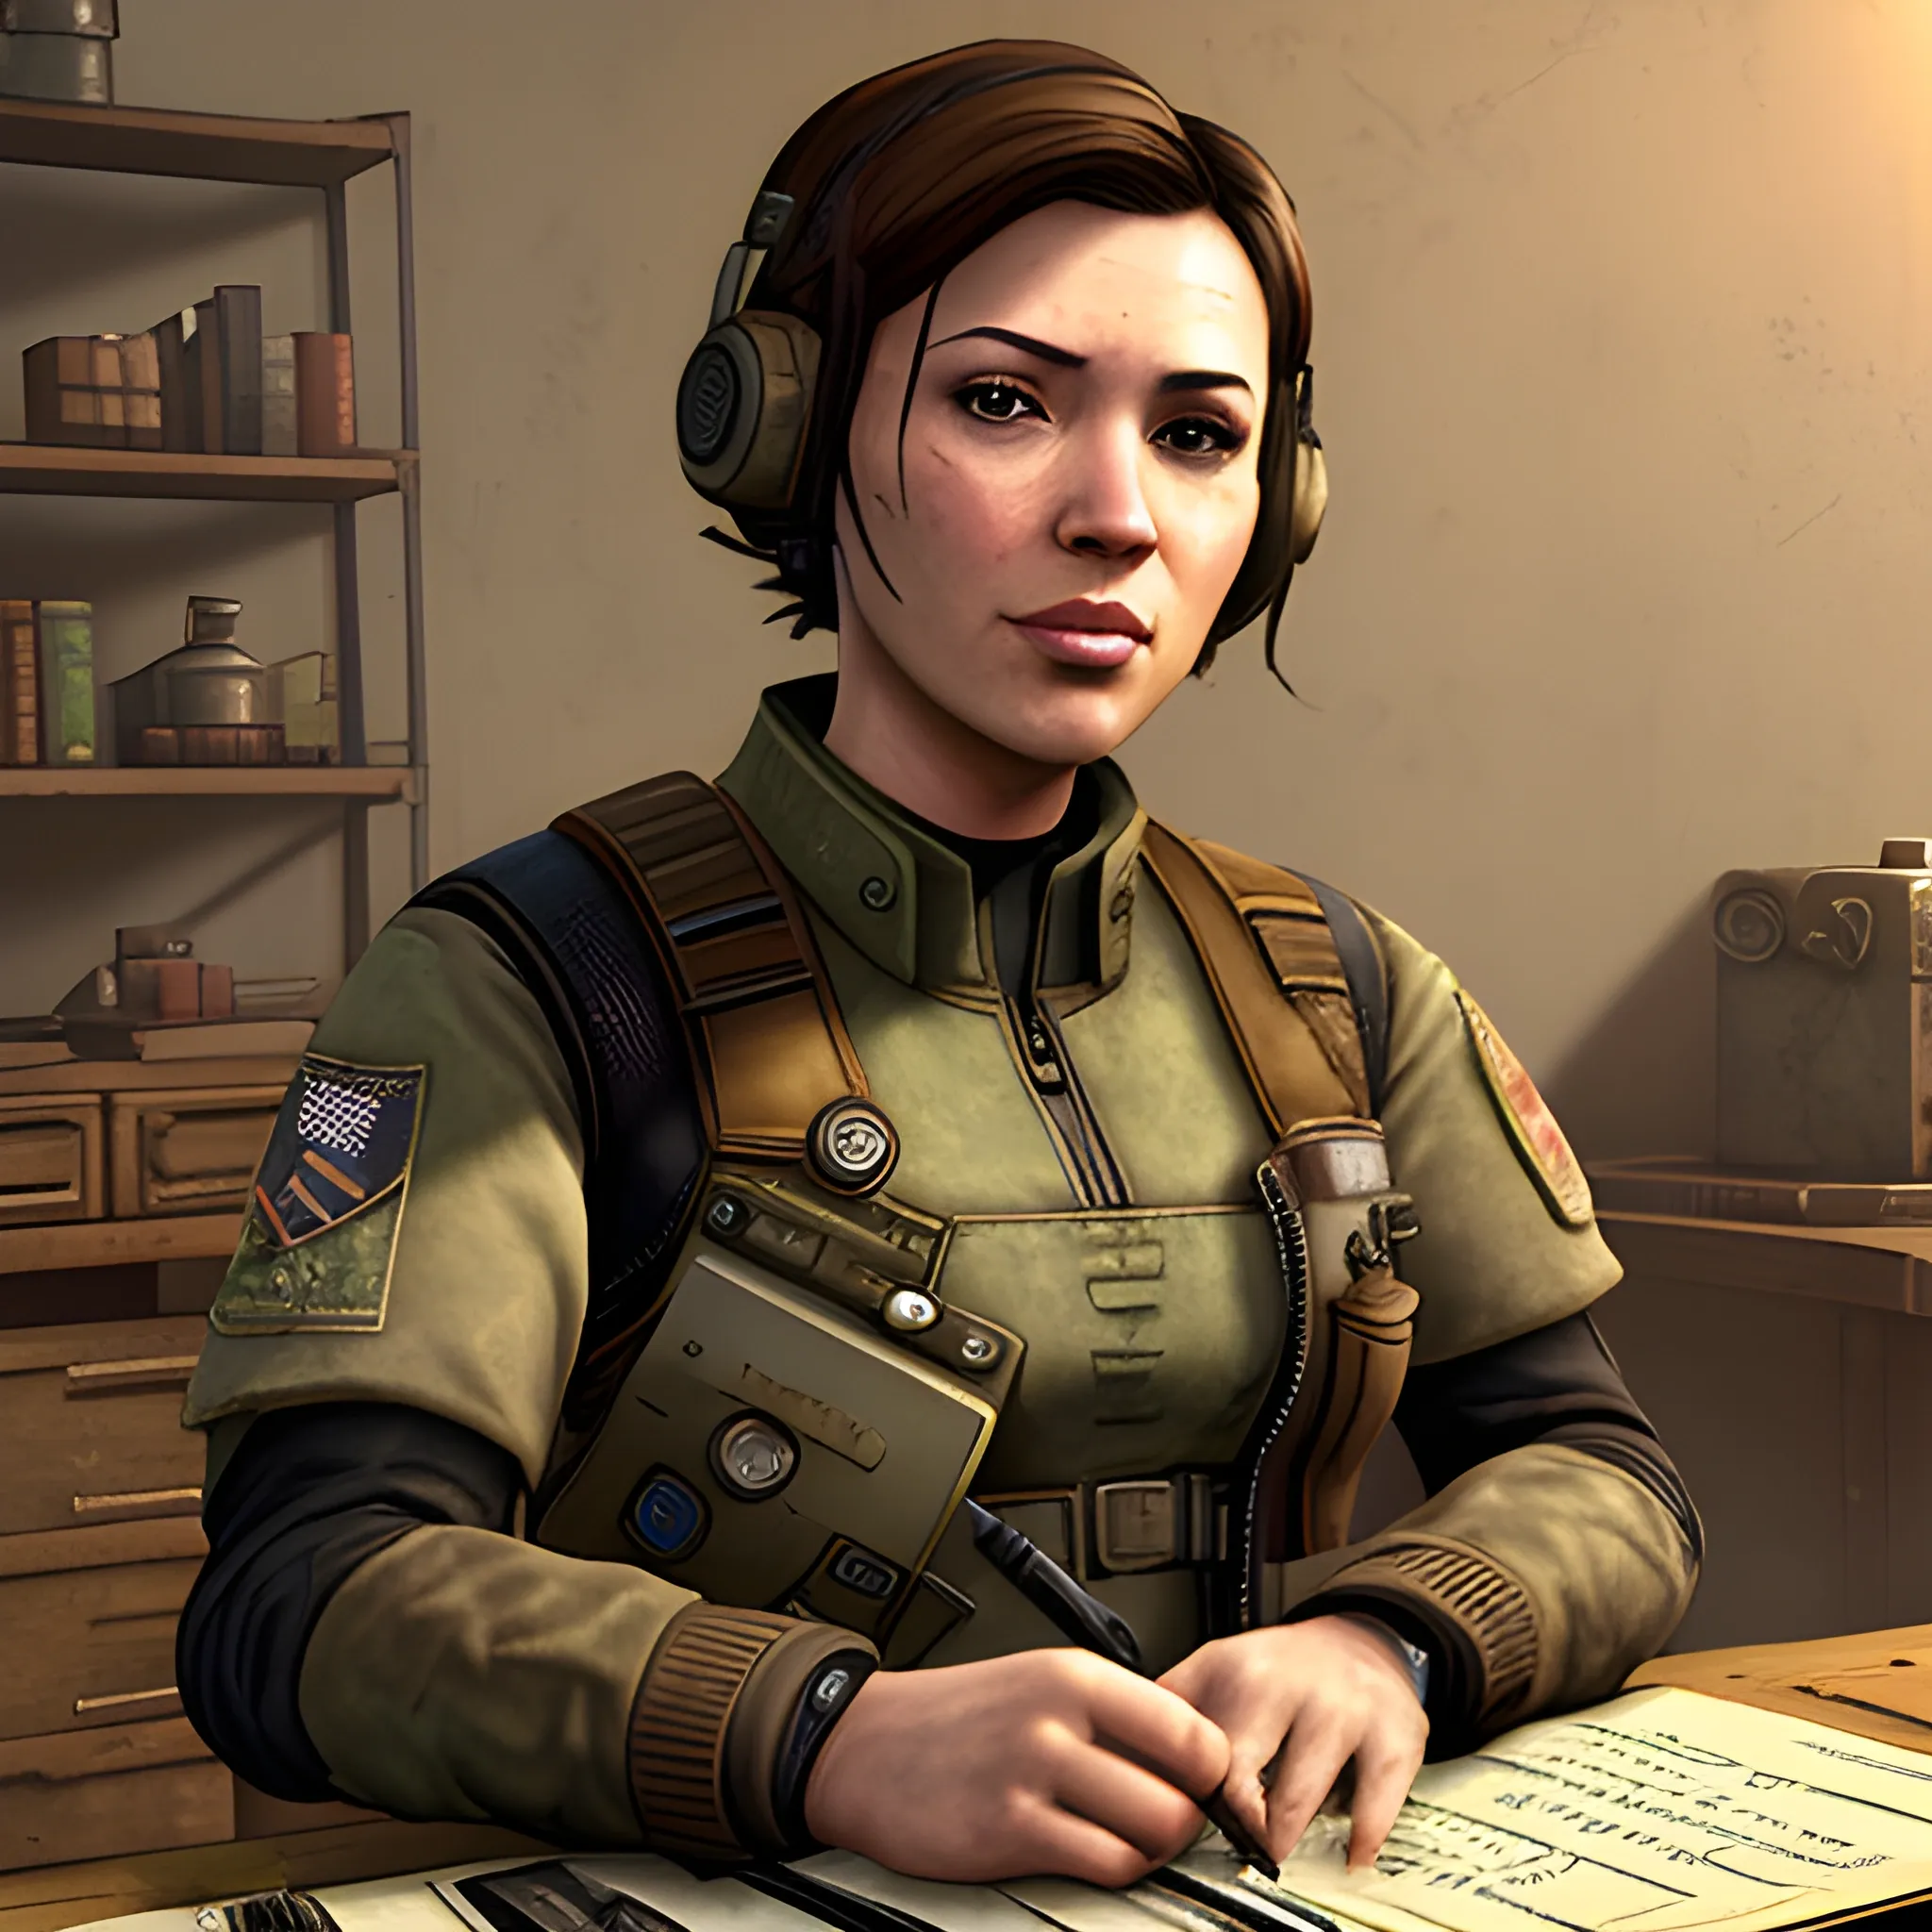 In the style of Fallout New Vegas, masterpiece, Kaylee from Firefly as a Brotherhood of Steel Scribe with a dirty face in a brown uniform and black tactical vest on top full of tools and notebooks